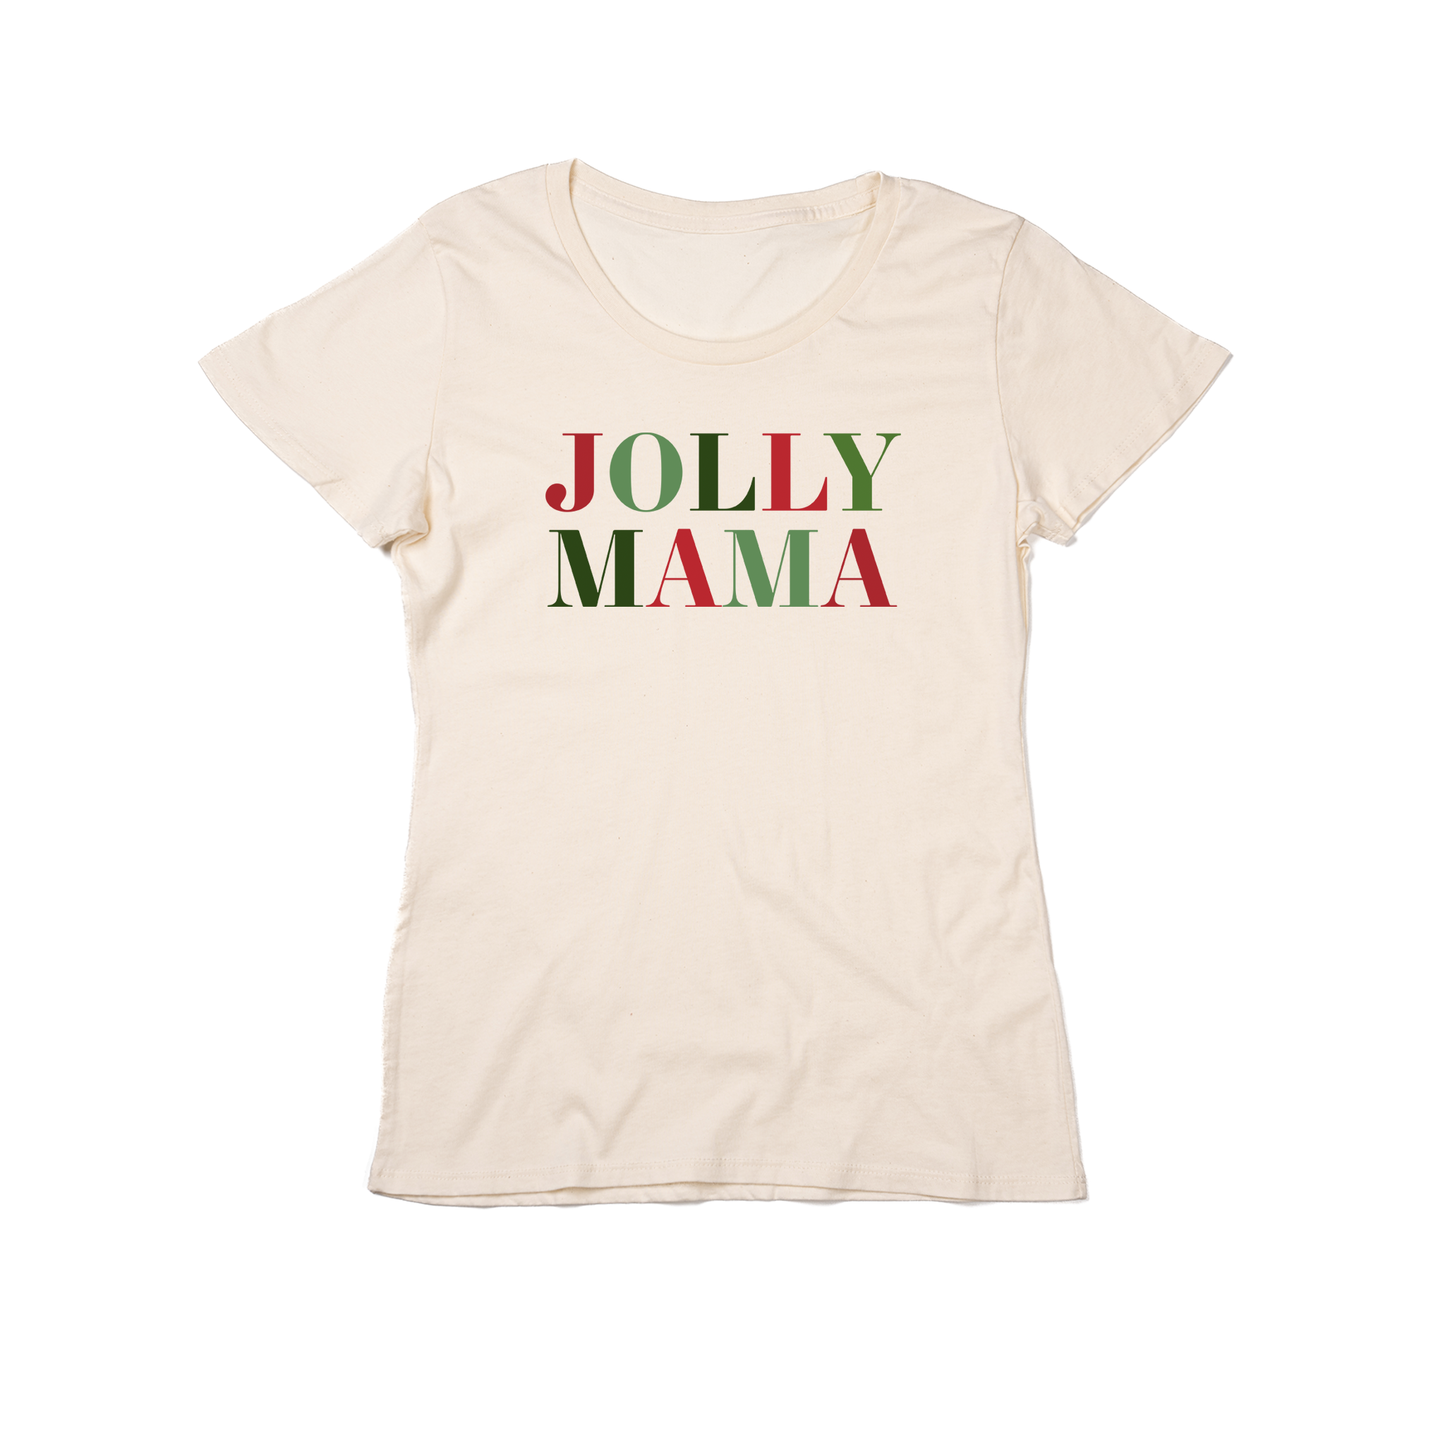 Jolly Mama - Women's Fitted Tee (Natural)